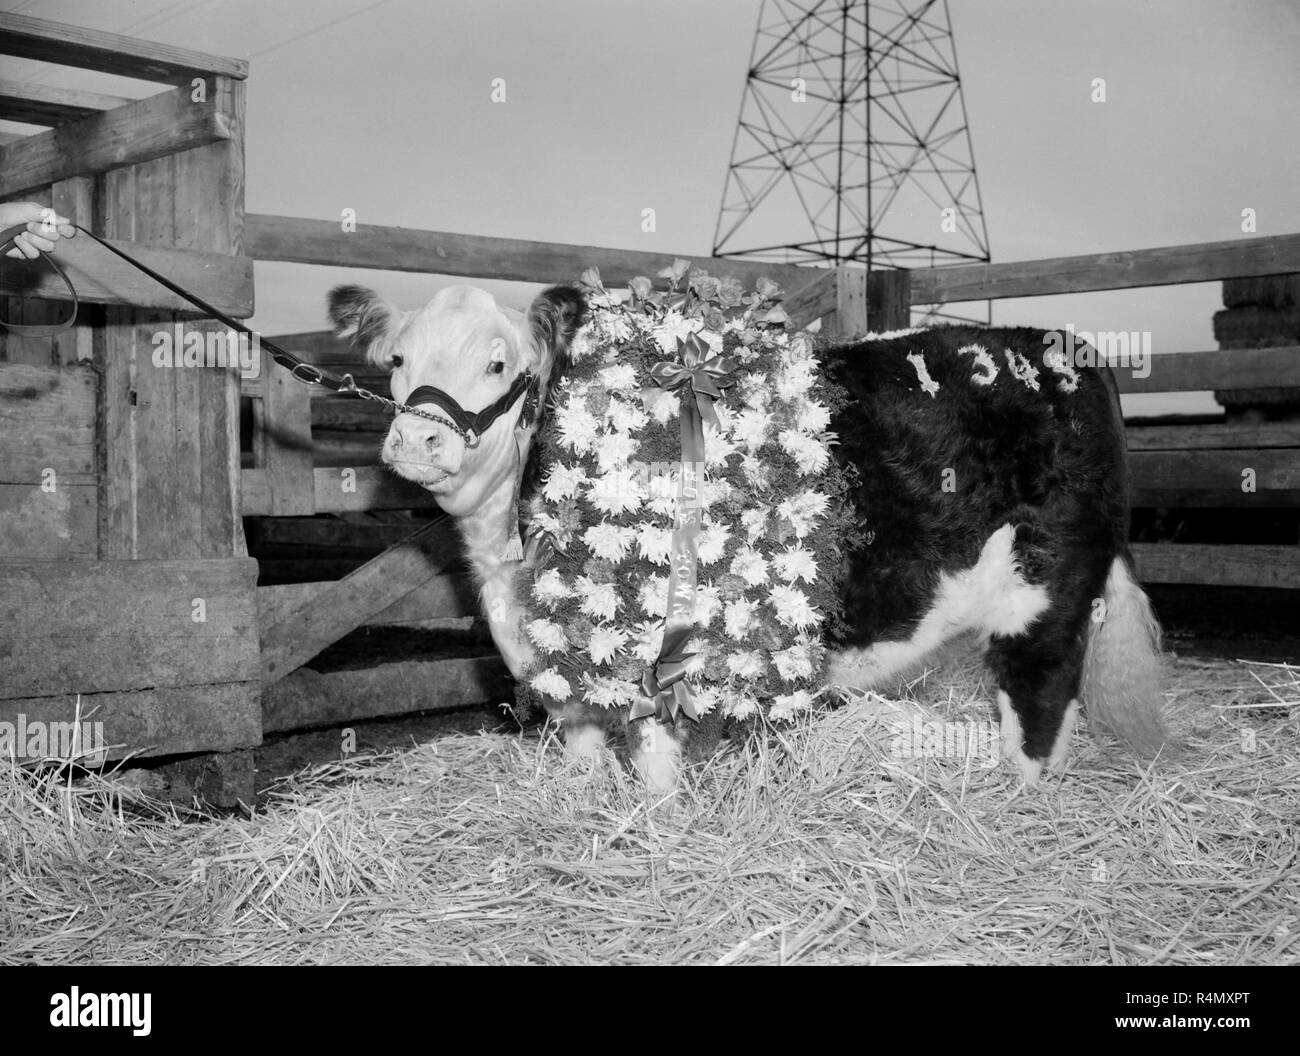 A prize-winning steer poses for a victory portrait after a competition in Southern California, ca. 1952. Stock Photo